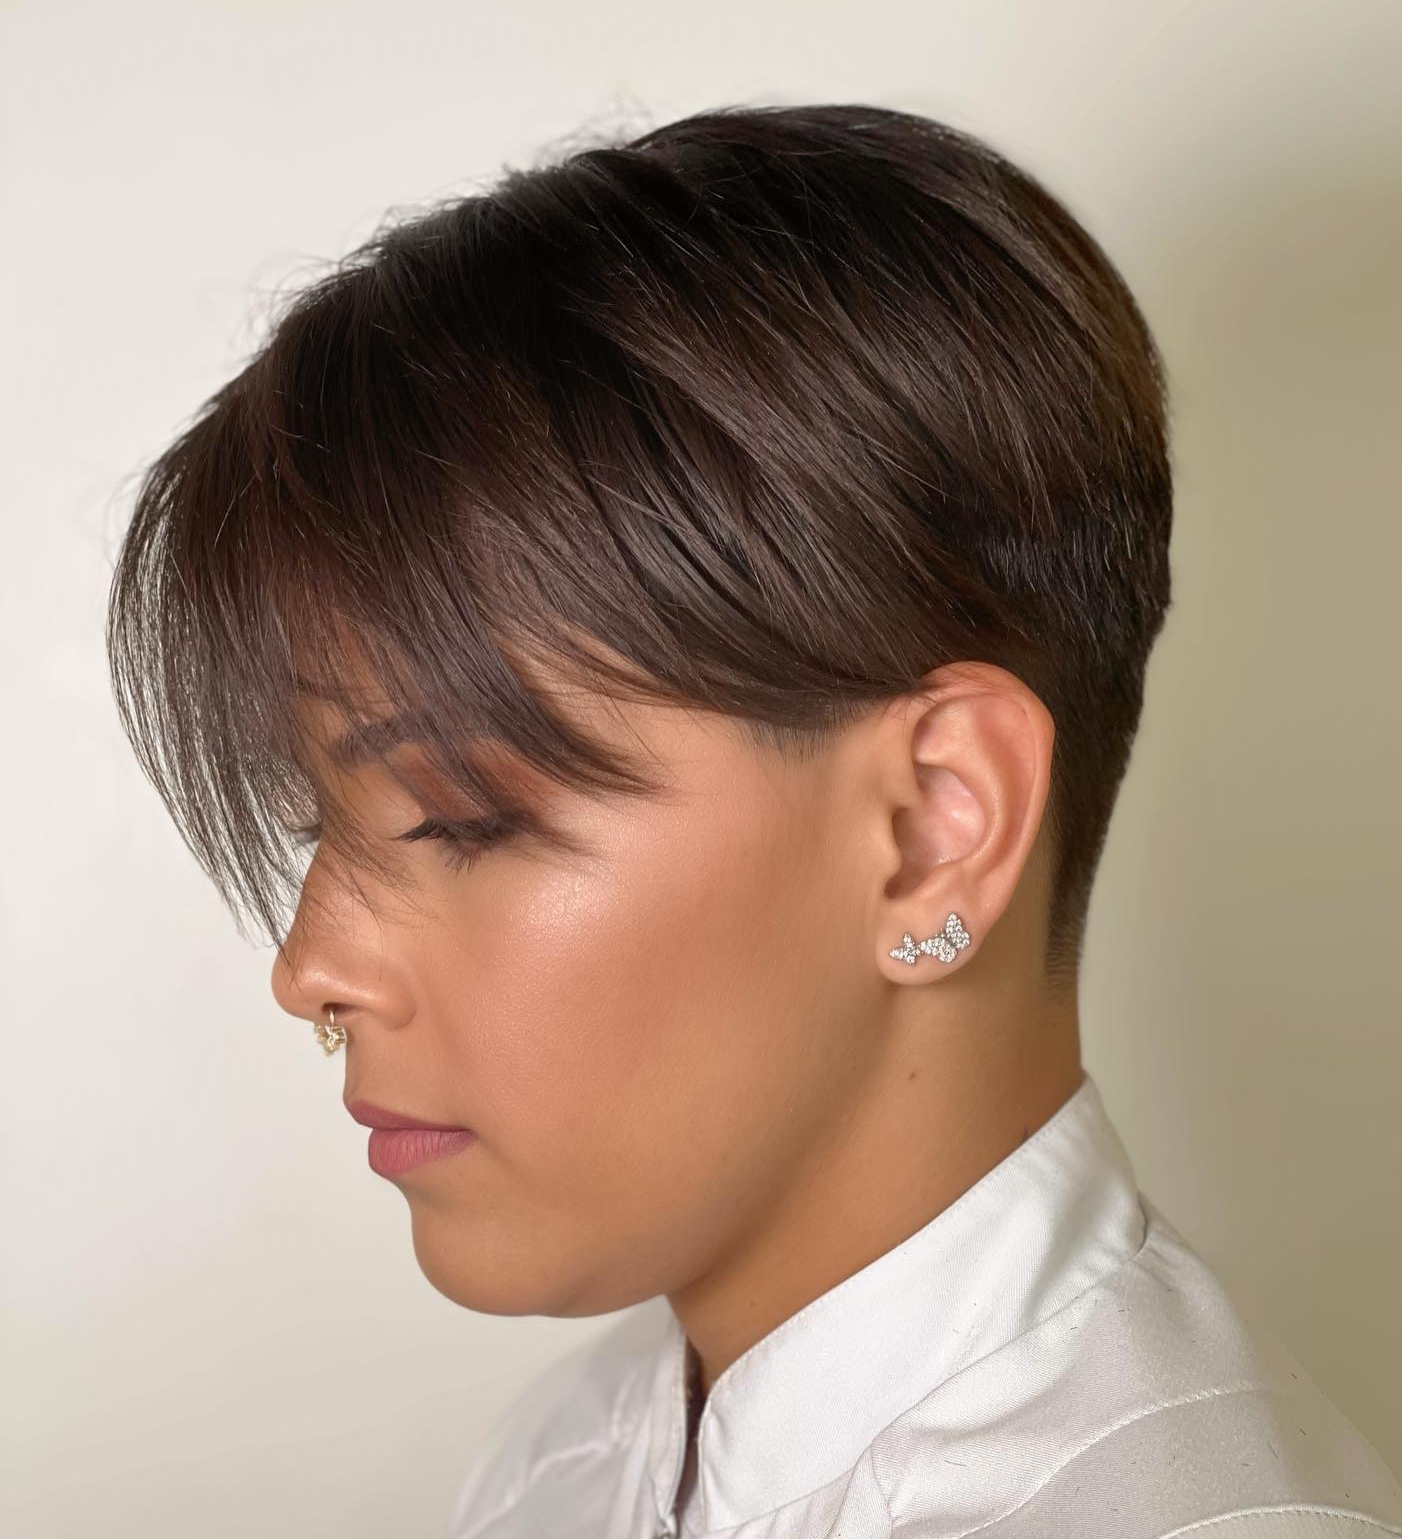 Short Pixie Cut with Bang on Fine Hair